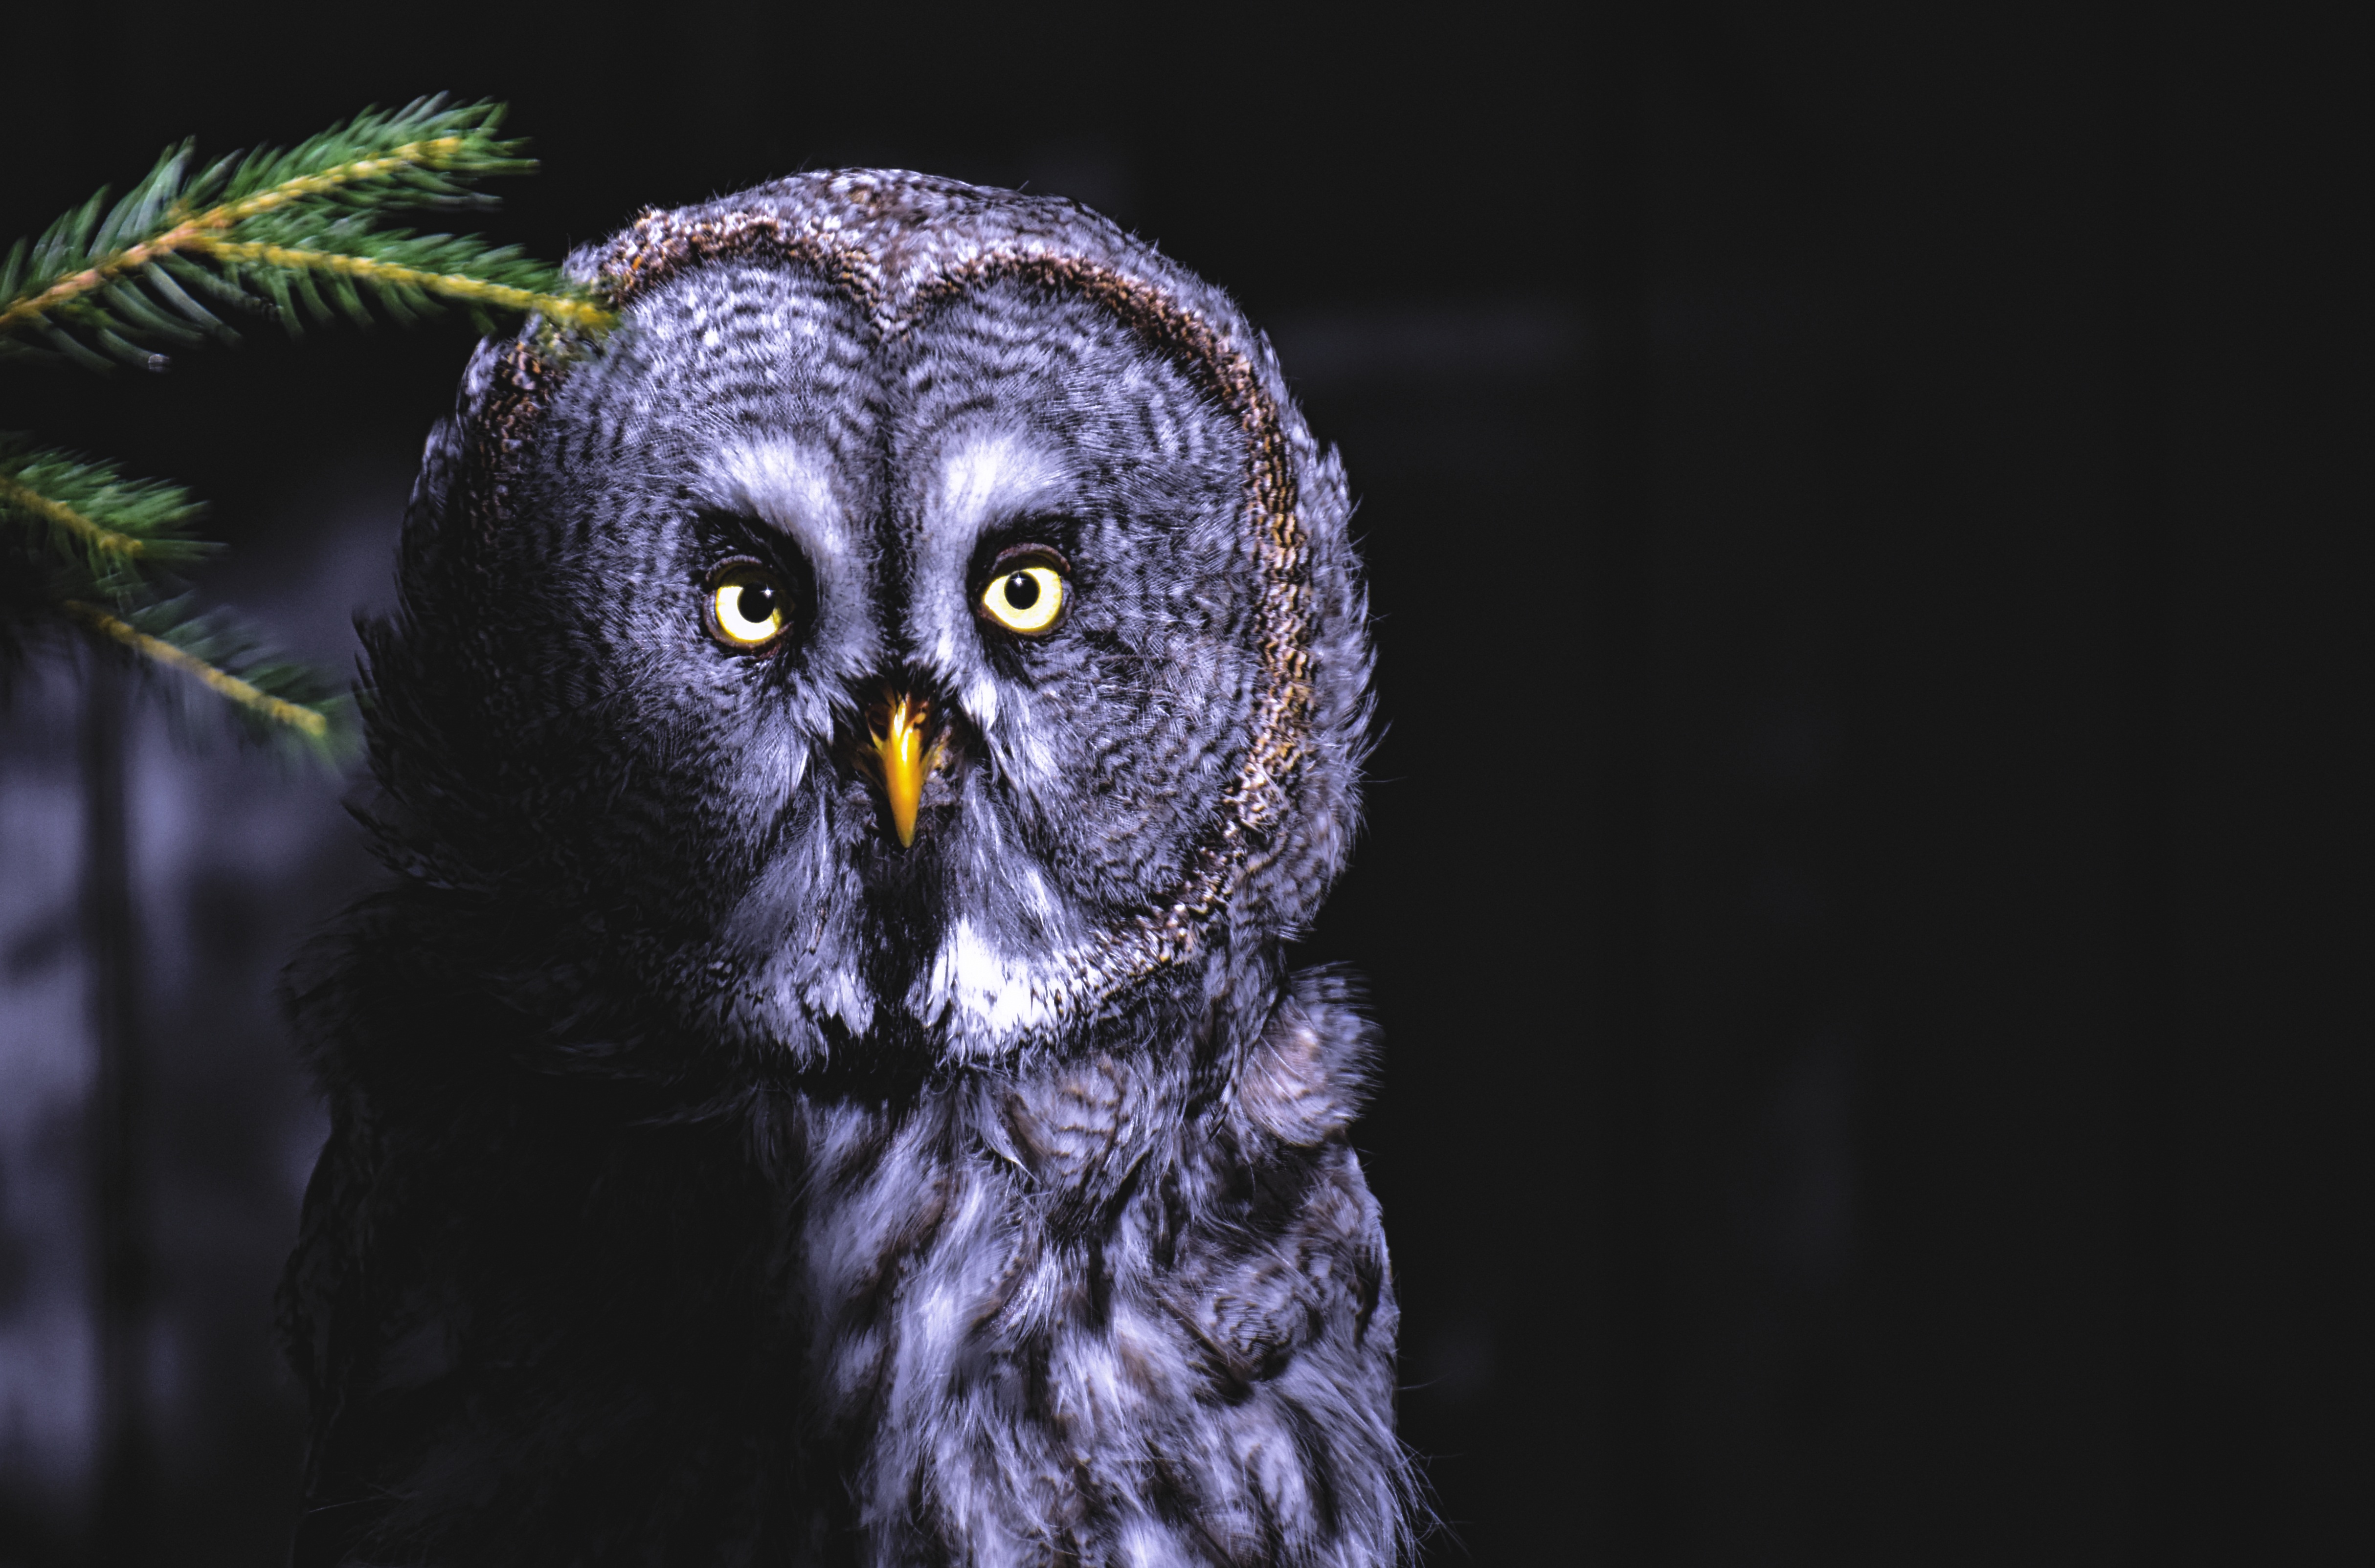 80802 2560x1600 PC pictures for free, download owl, looks, animals, bird 2560x1600 wallpapers on your desktop